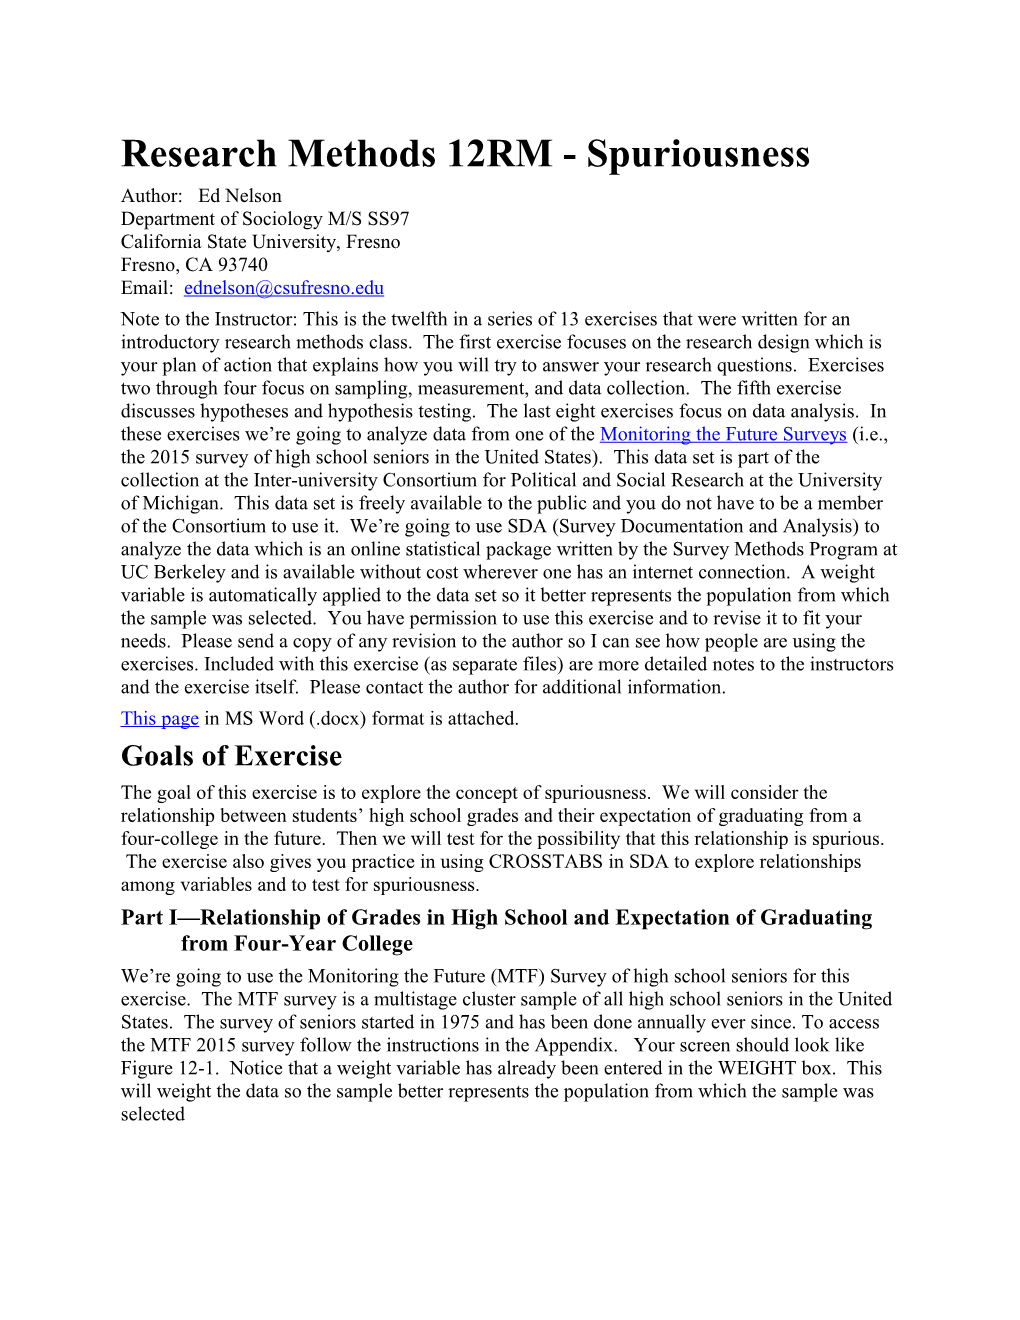 Research Methods 12RM - Spuriousness